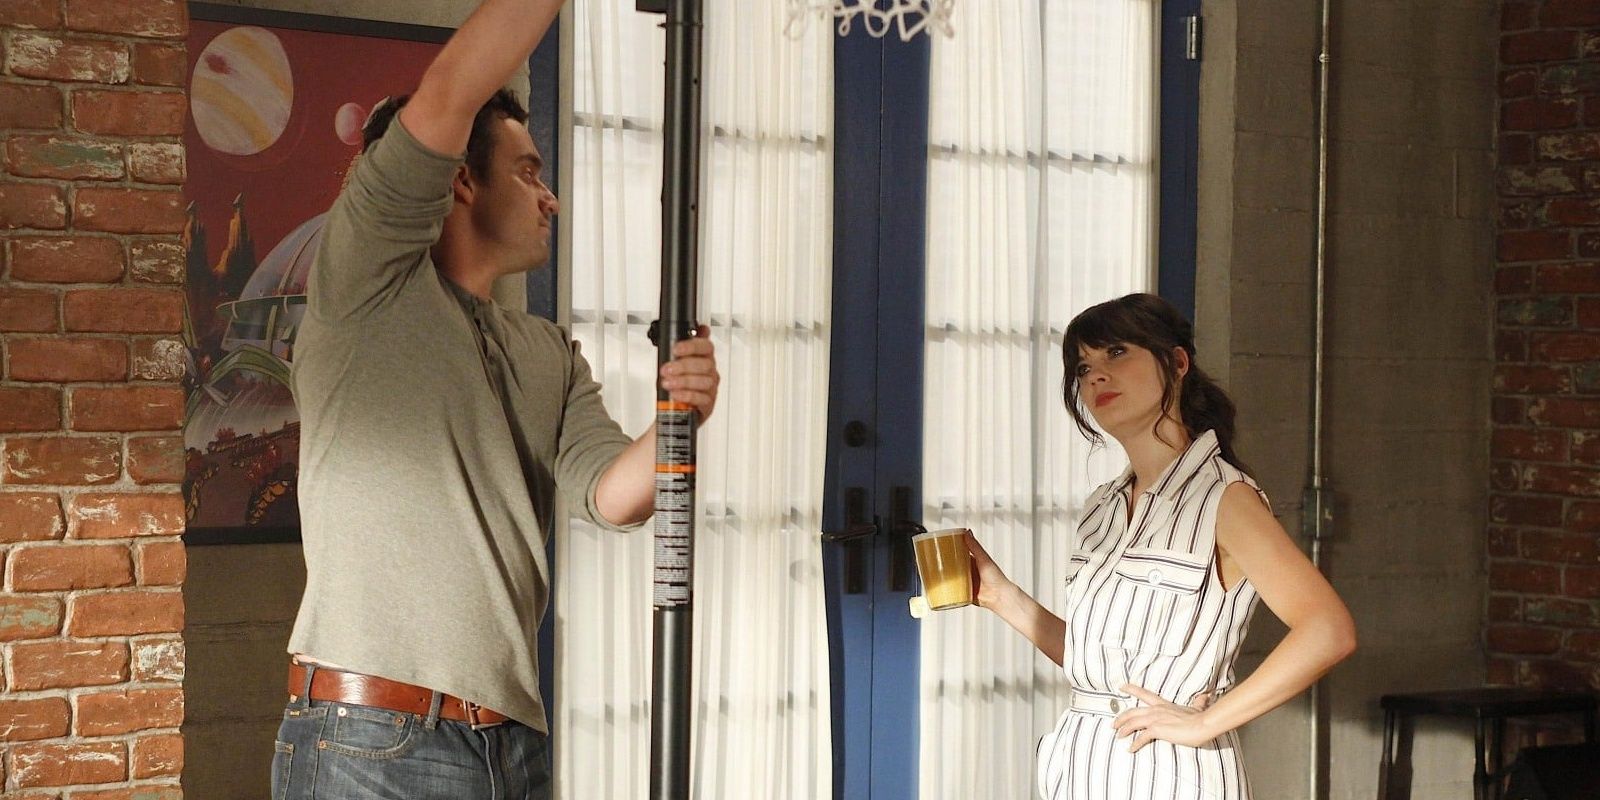 New Girl 10 Funniest Nick Miller Quotes Ranked